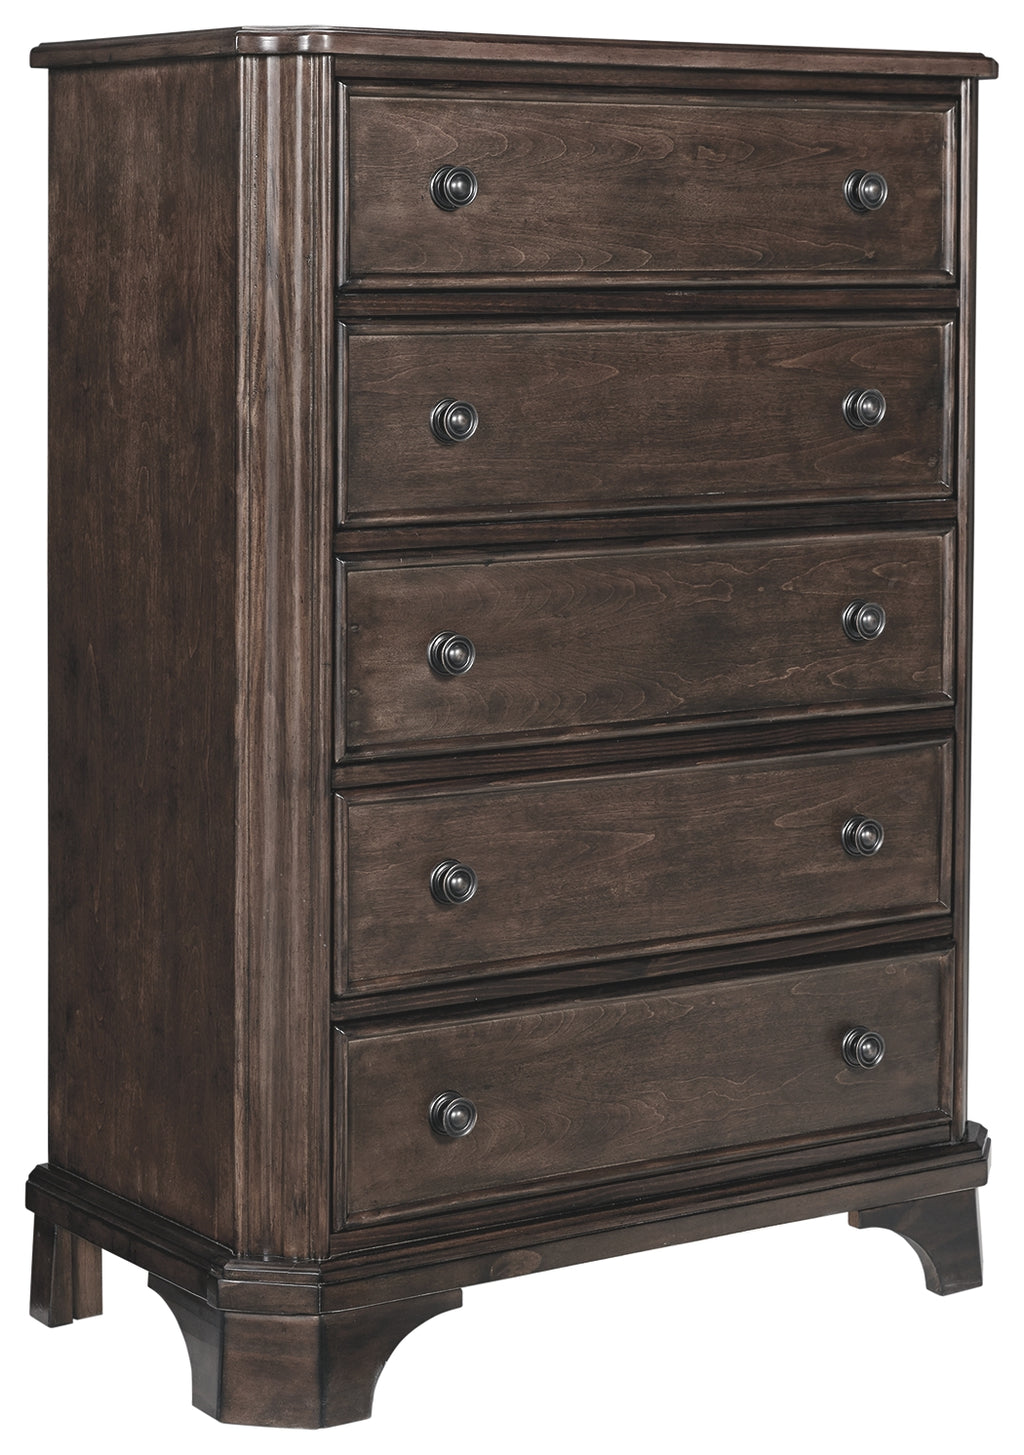 Adinton B517-46 Brown Five Drawer Chest